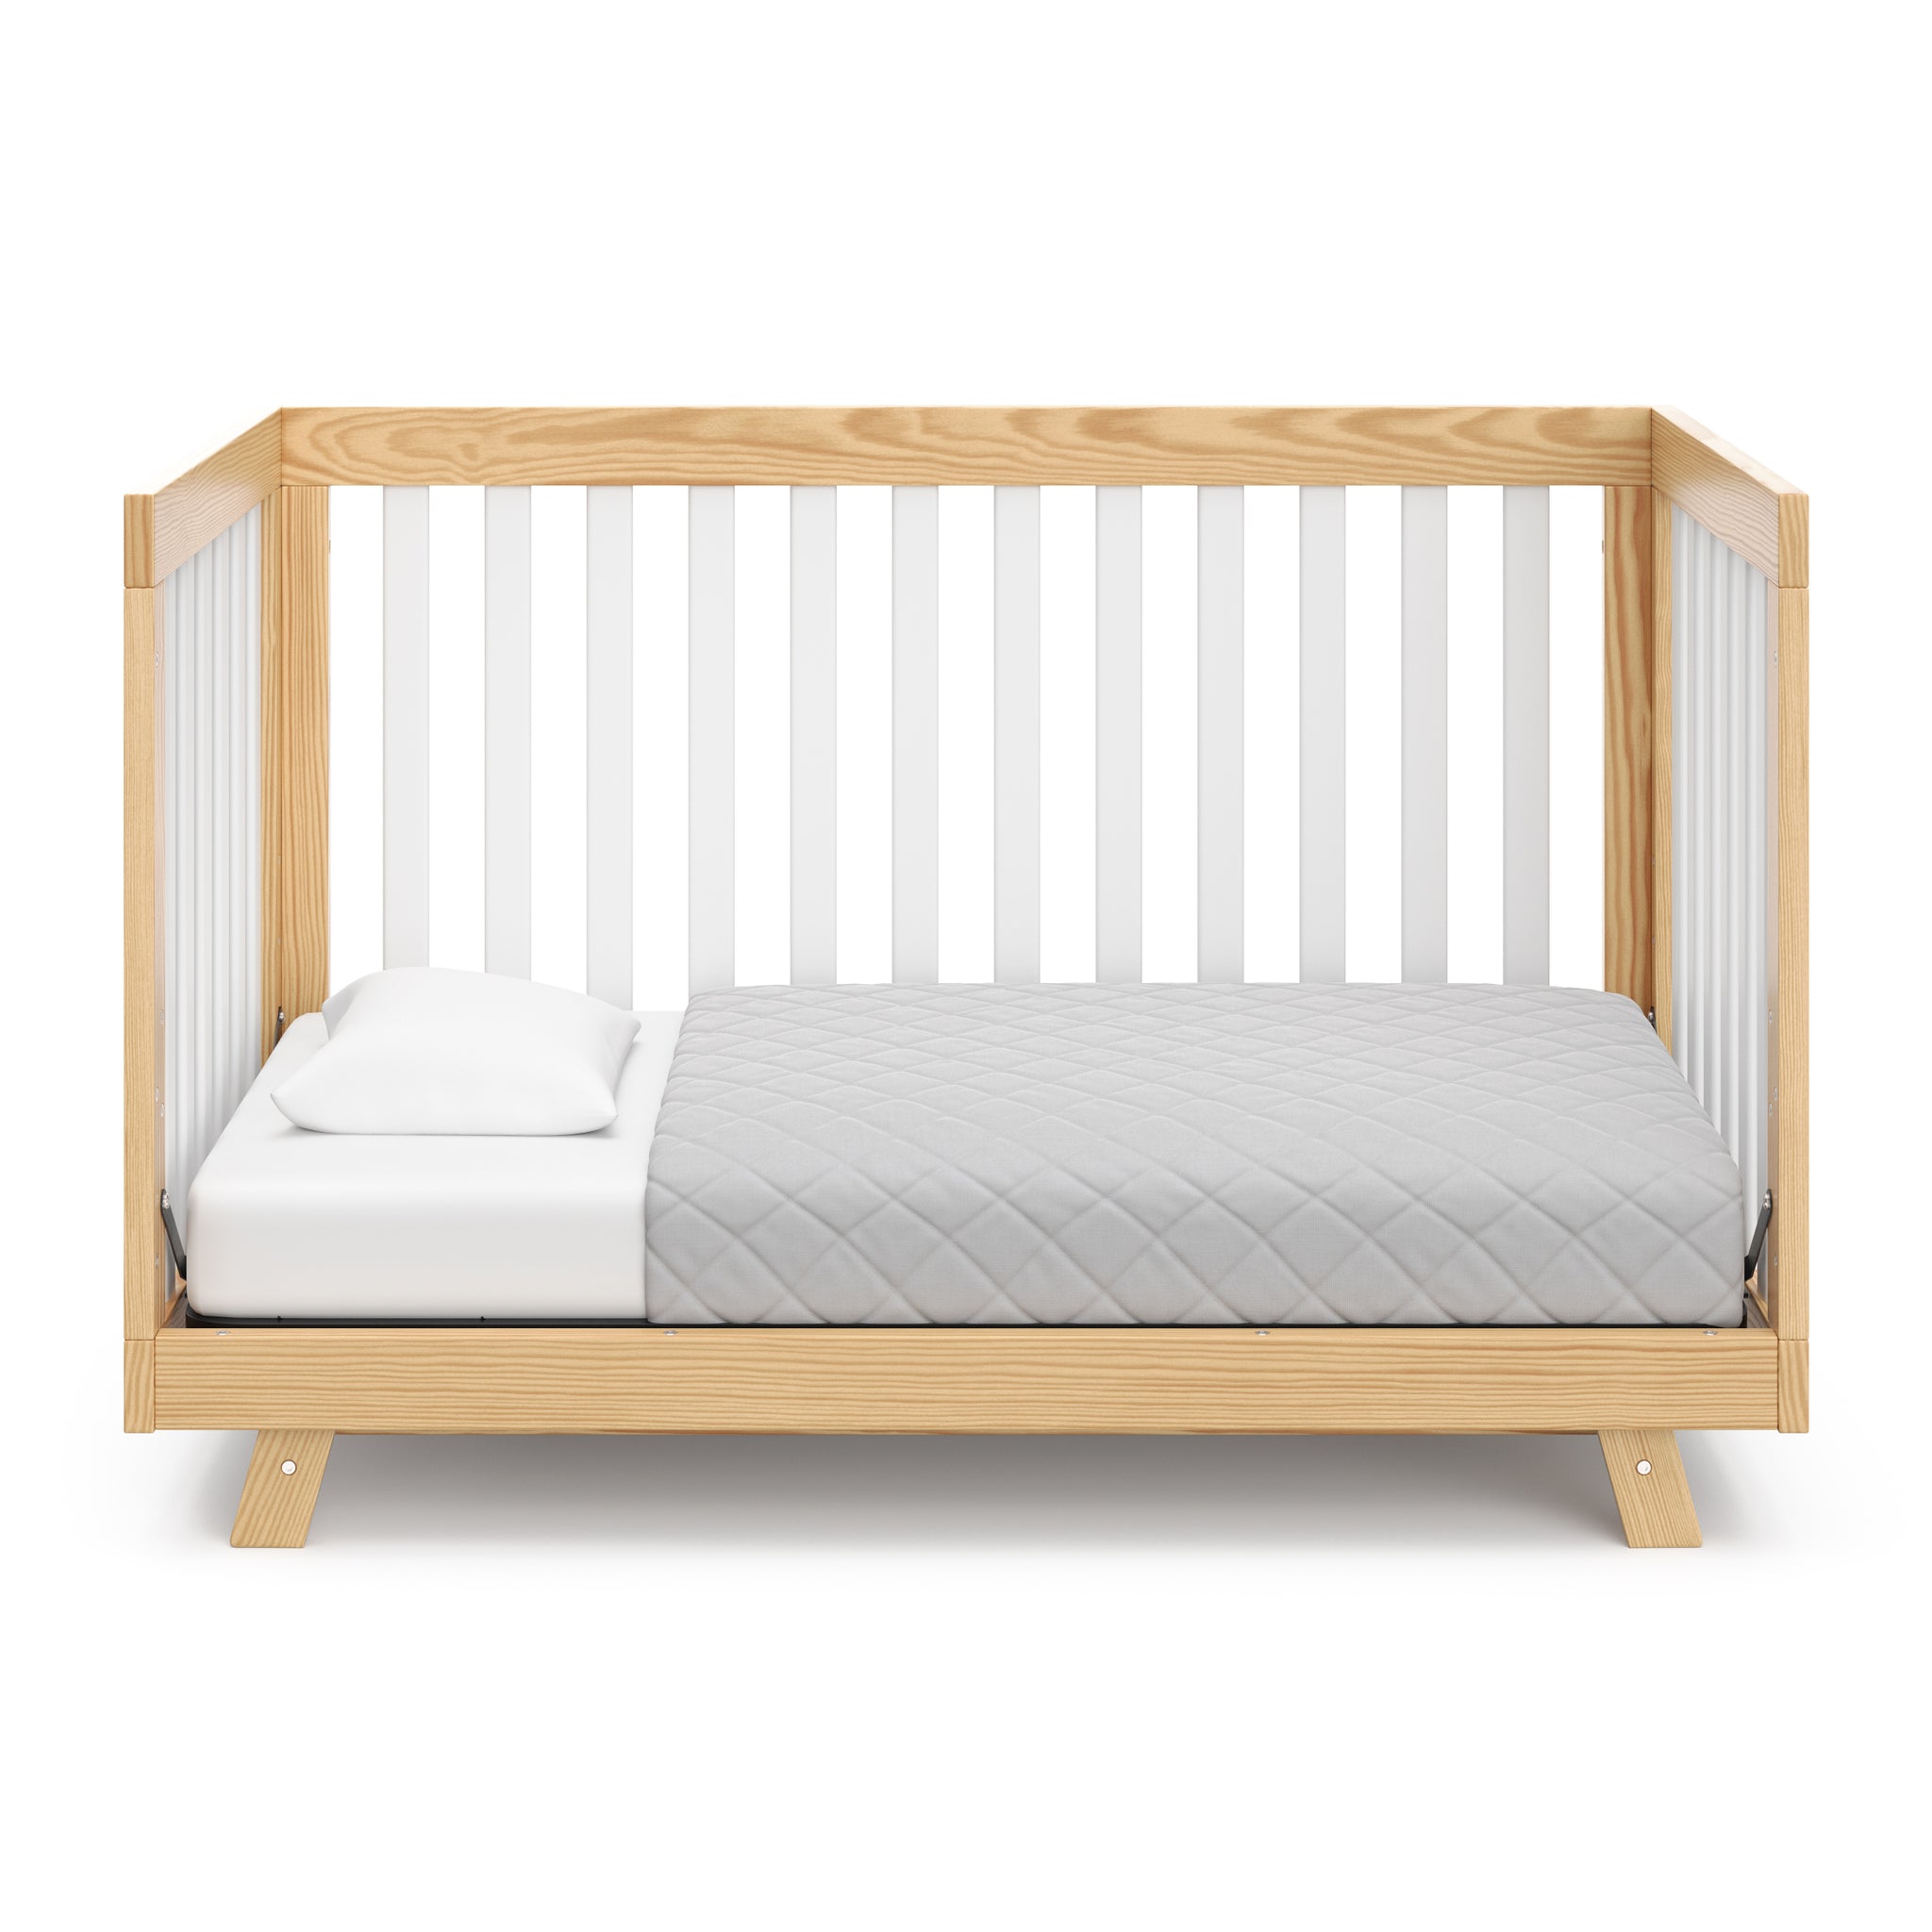 Natural with white crib in toddler bed conversion